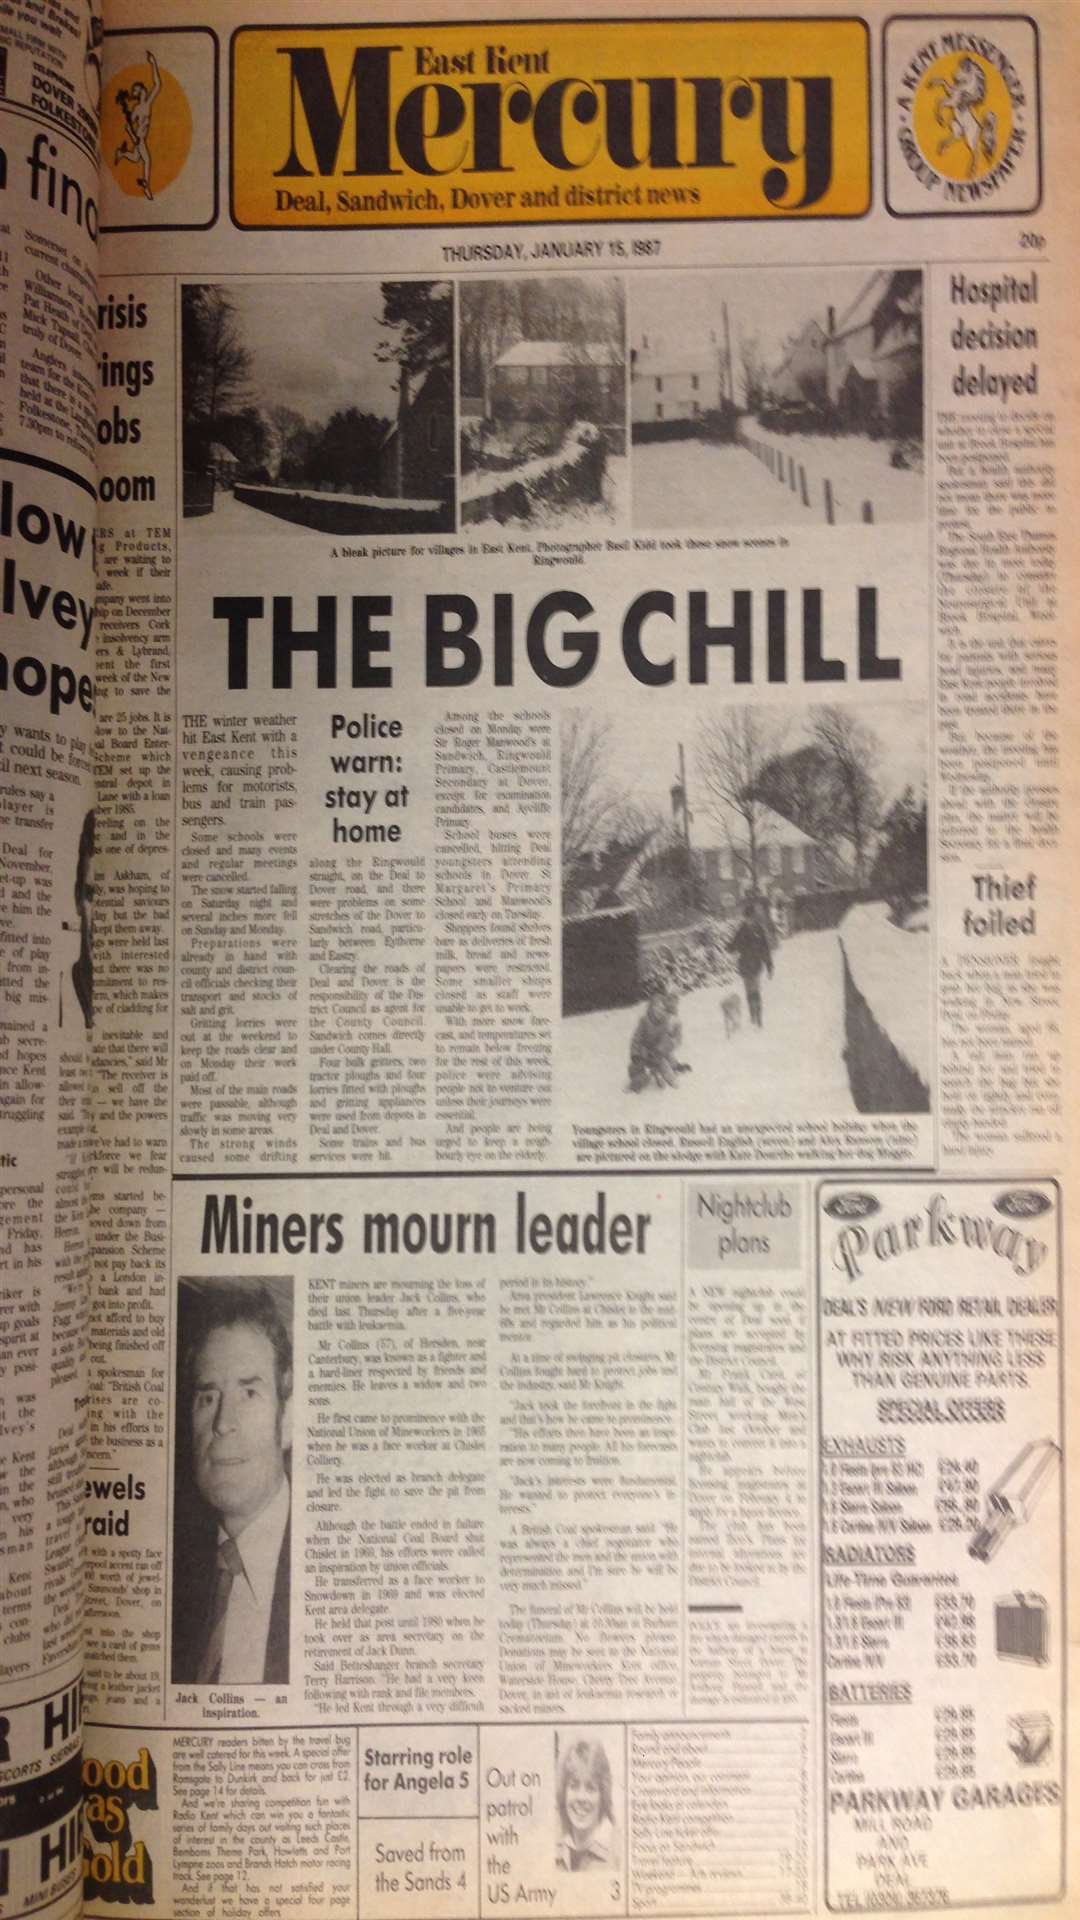 The Mercury covered the snow fall in east Kent in January 1987